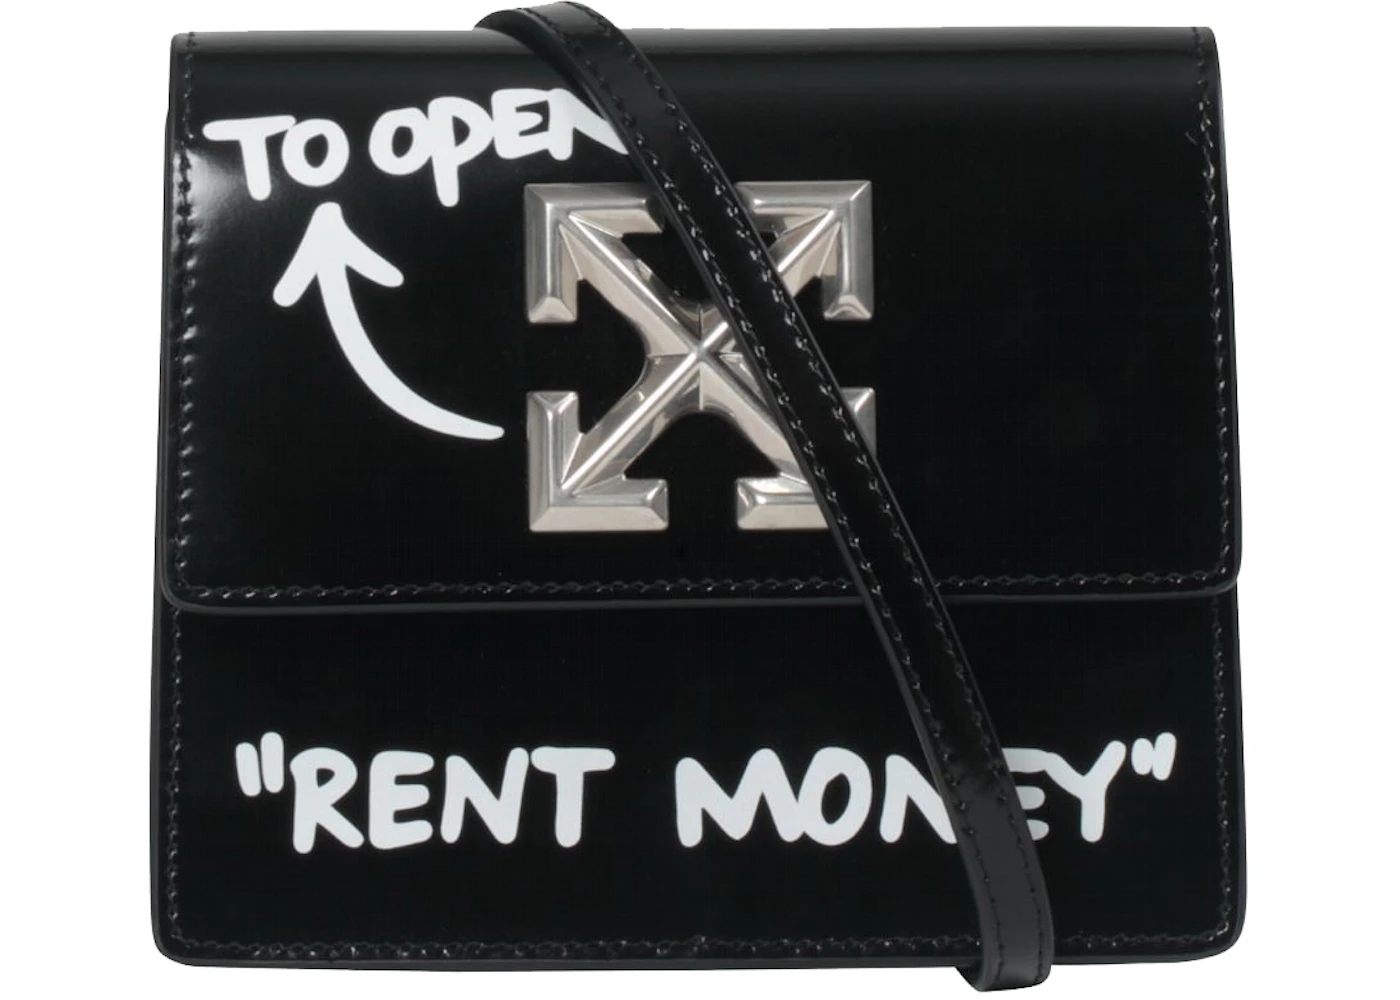 OFF-WHITE 0.7 Jitney Bag RENT MONEY Black/White in Leather with